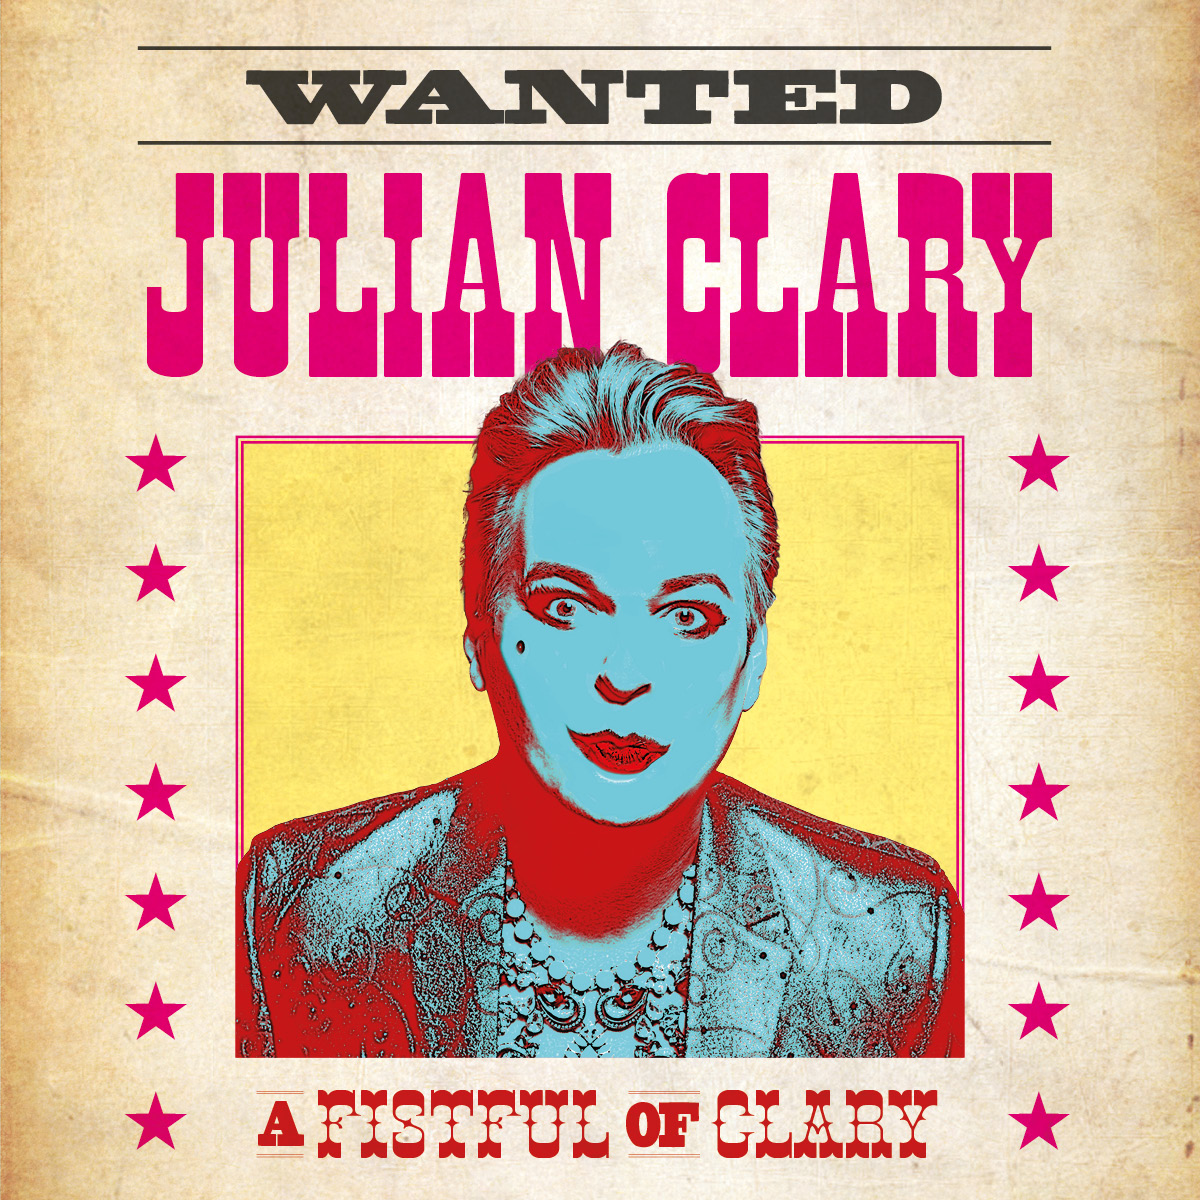 Julian Clary – A Fistful of Clary